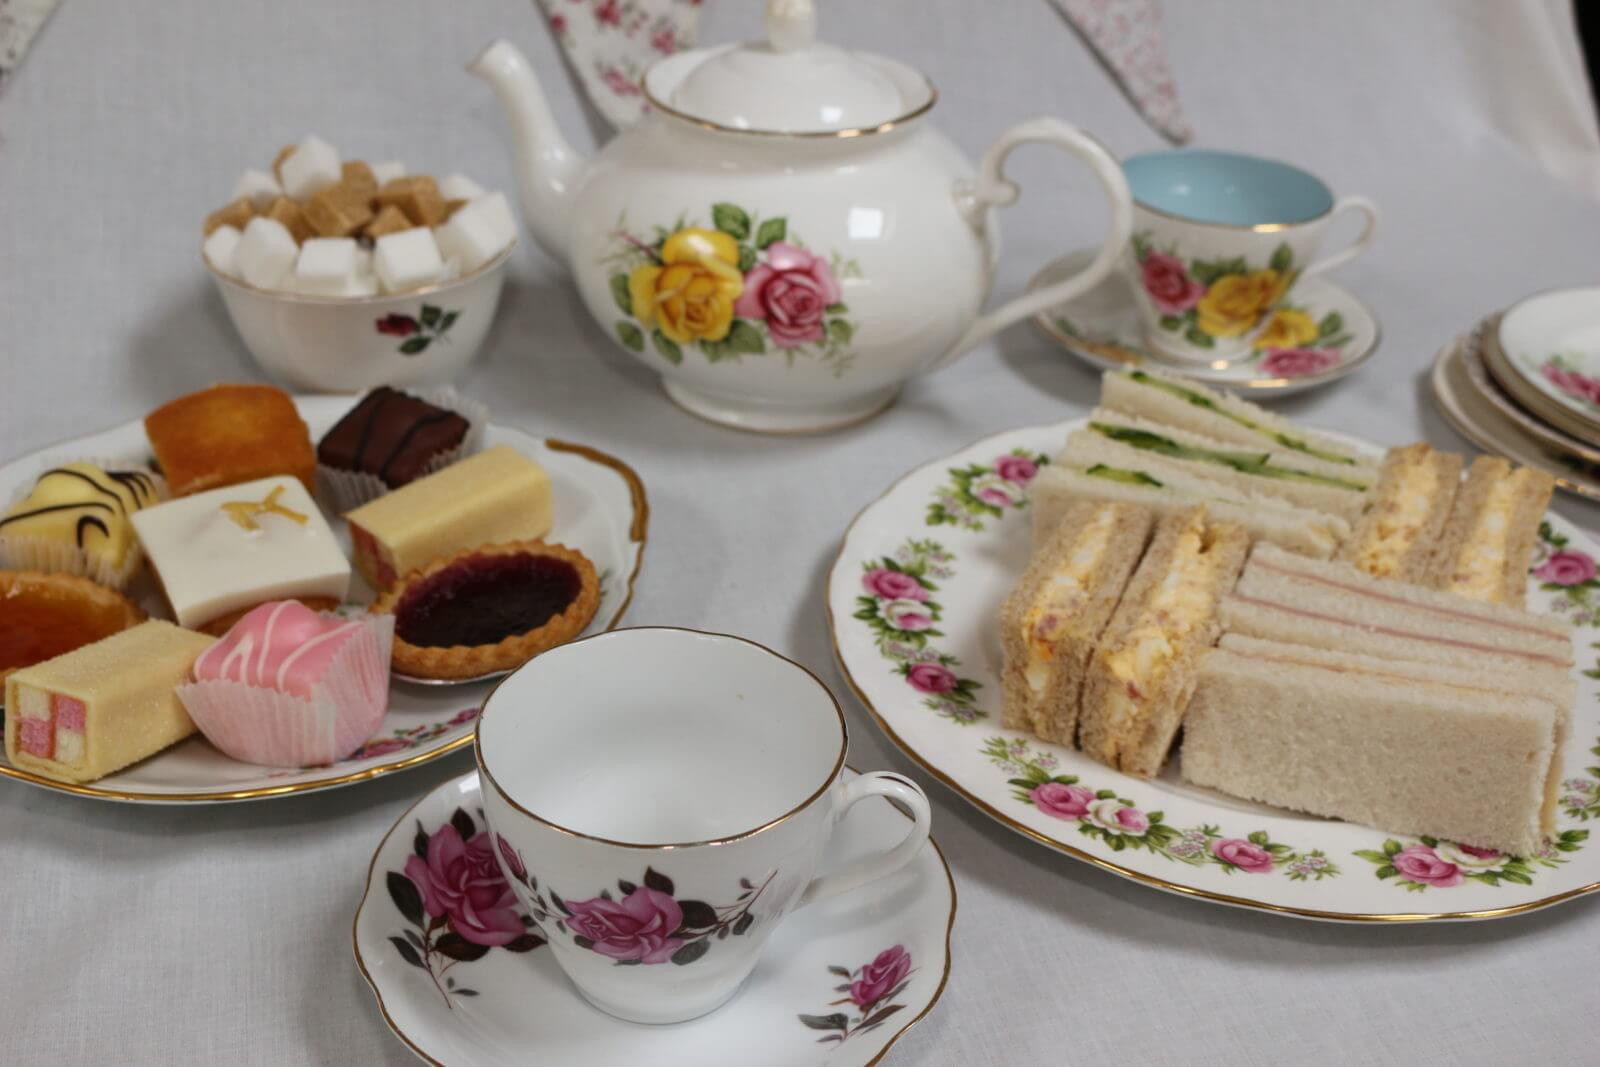 Tea Party Decorations Ideas
 10 Afternoon Tea Party Ideas to make yours extra special